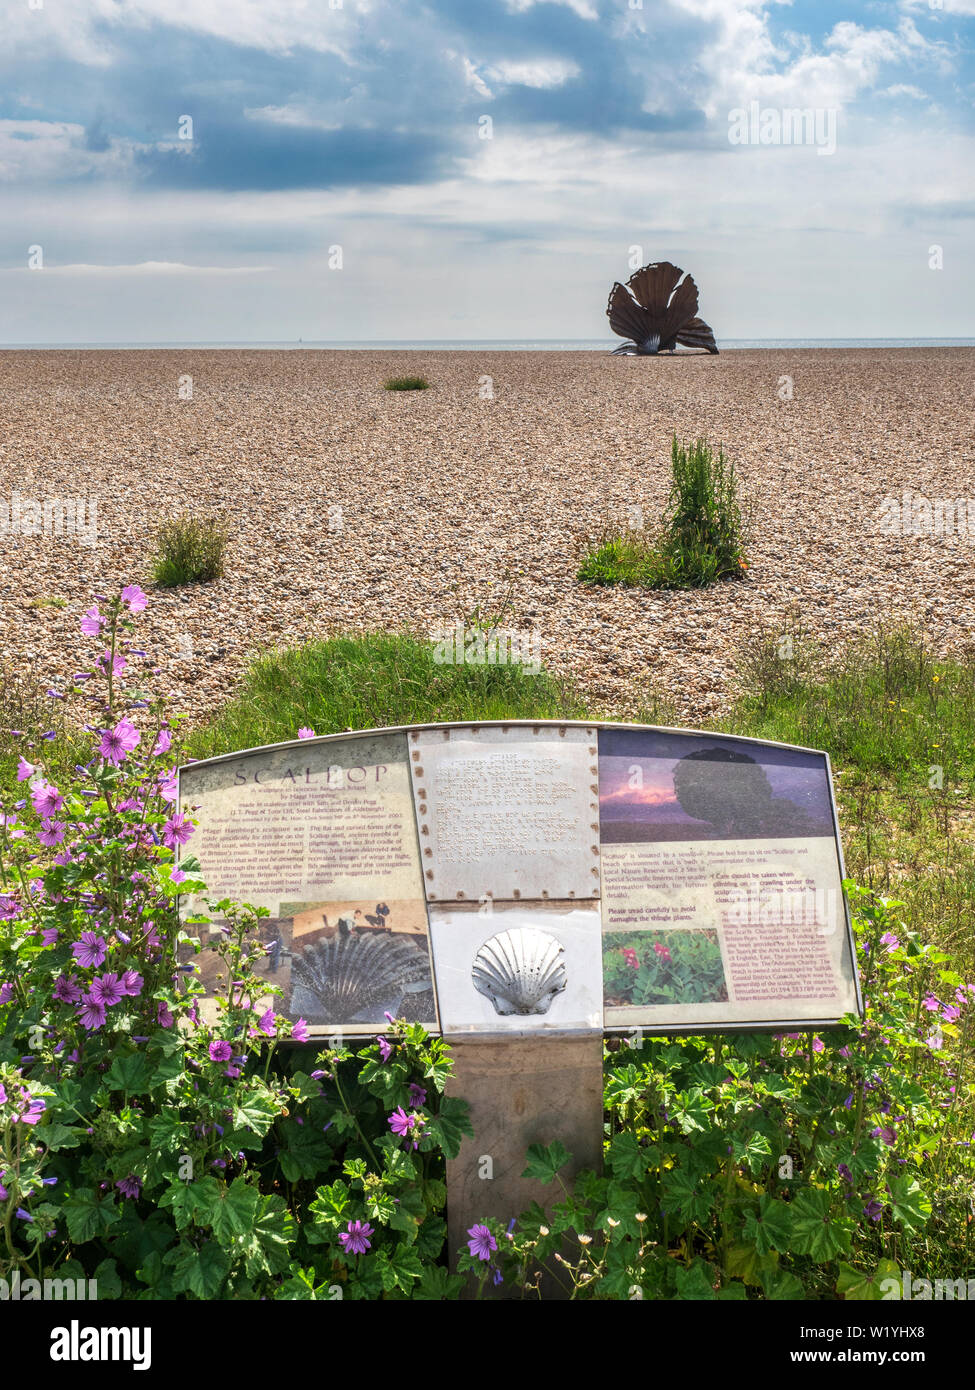 Scallop sculpture dedicated to Benjamin Britten by Maggi Hambling on the beach at Aldeburgh Suffolk England Stock Photo